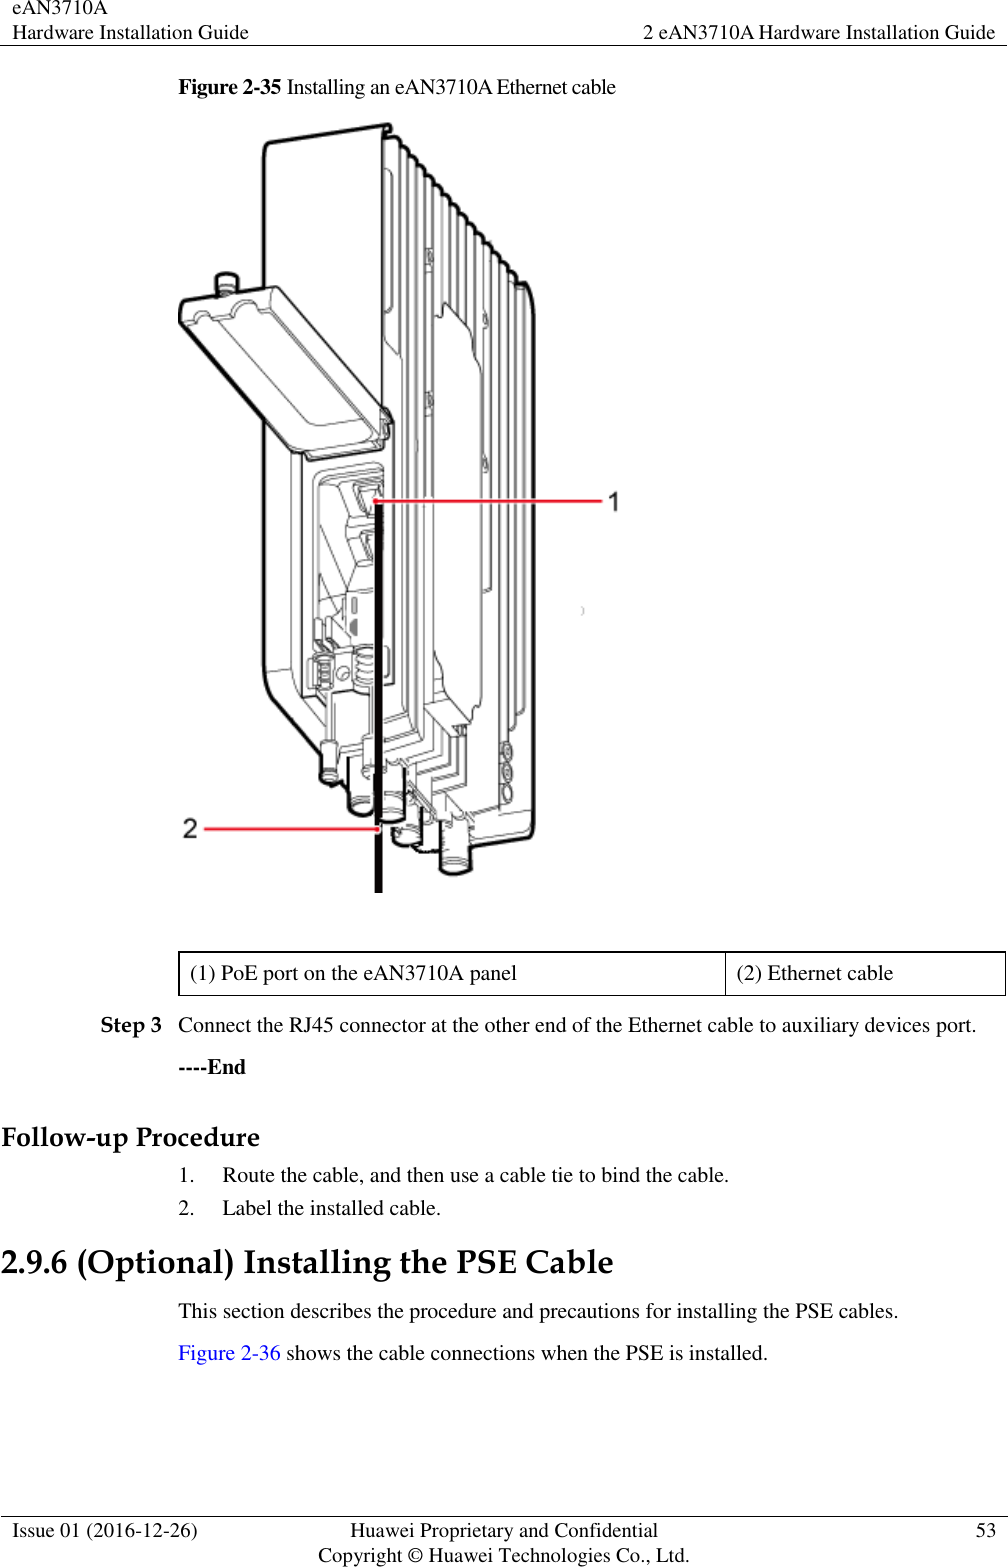 eAN3710A Hardware Installation Guide 2 eAN3710A Hardware Installation Guide  Issue 01 (2016-12-26) Huawei Proprietary and Confidential                                     Copyright © Huawei Technologies Co., Ltd. 53  Figure 2-35 Installing an eAN3710A Ethernet cable     (1) PoE port on the eAN3710A panel (2) Ethernet cable Step 3 Connect the RJ45 connector at the other end of the Ethernet cable to auxiliary devices port. ----End Follow-up Procedure 1. Route the cable, and then use a cable tie to bind the cable. 2. Label the installed cable. 2.9.6 (Optional) Installing the PSE Cable This section describes the procedure and precautions for installing the PSE cables. Figure 2-36 shows the cable connections when the PSE is installed. 